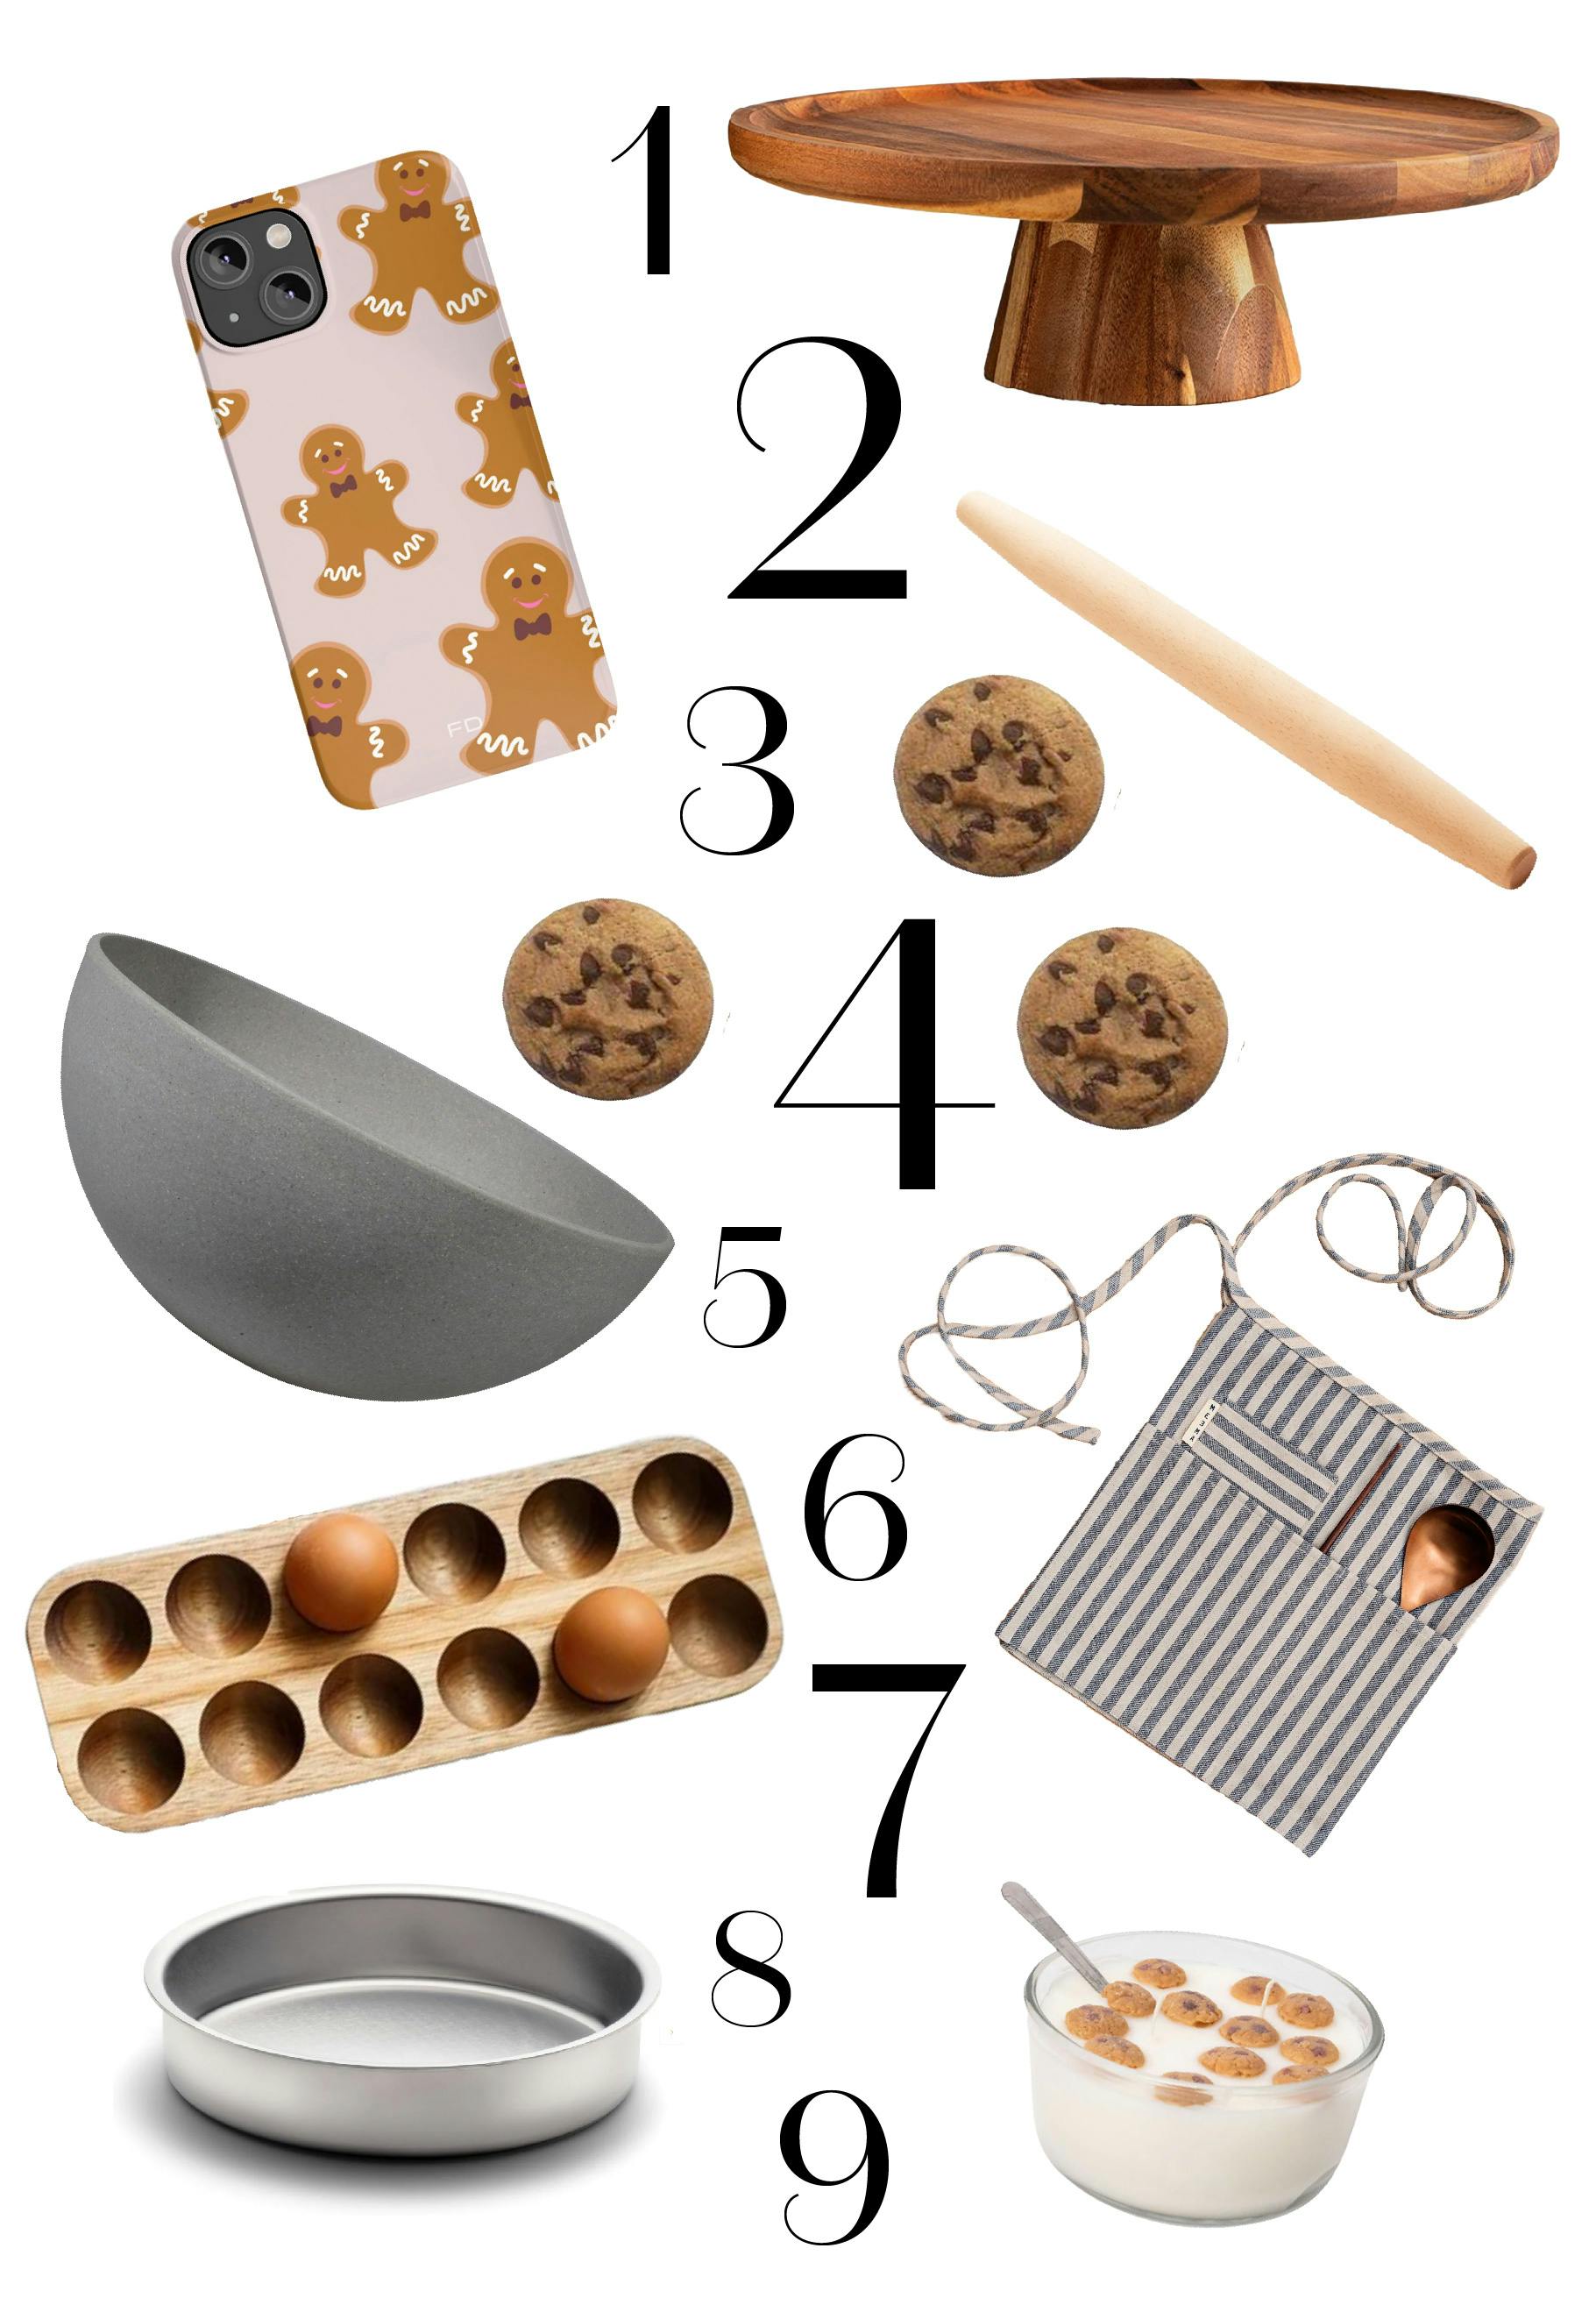 Great gift ideas for bakers